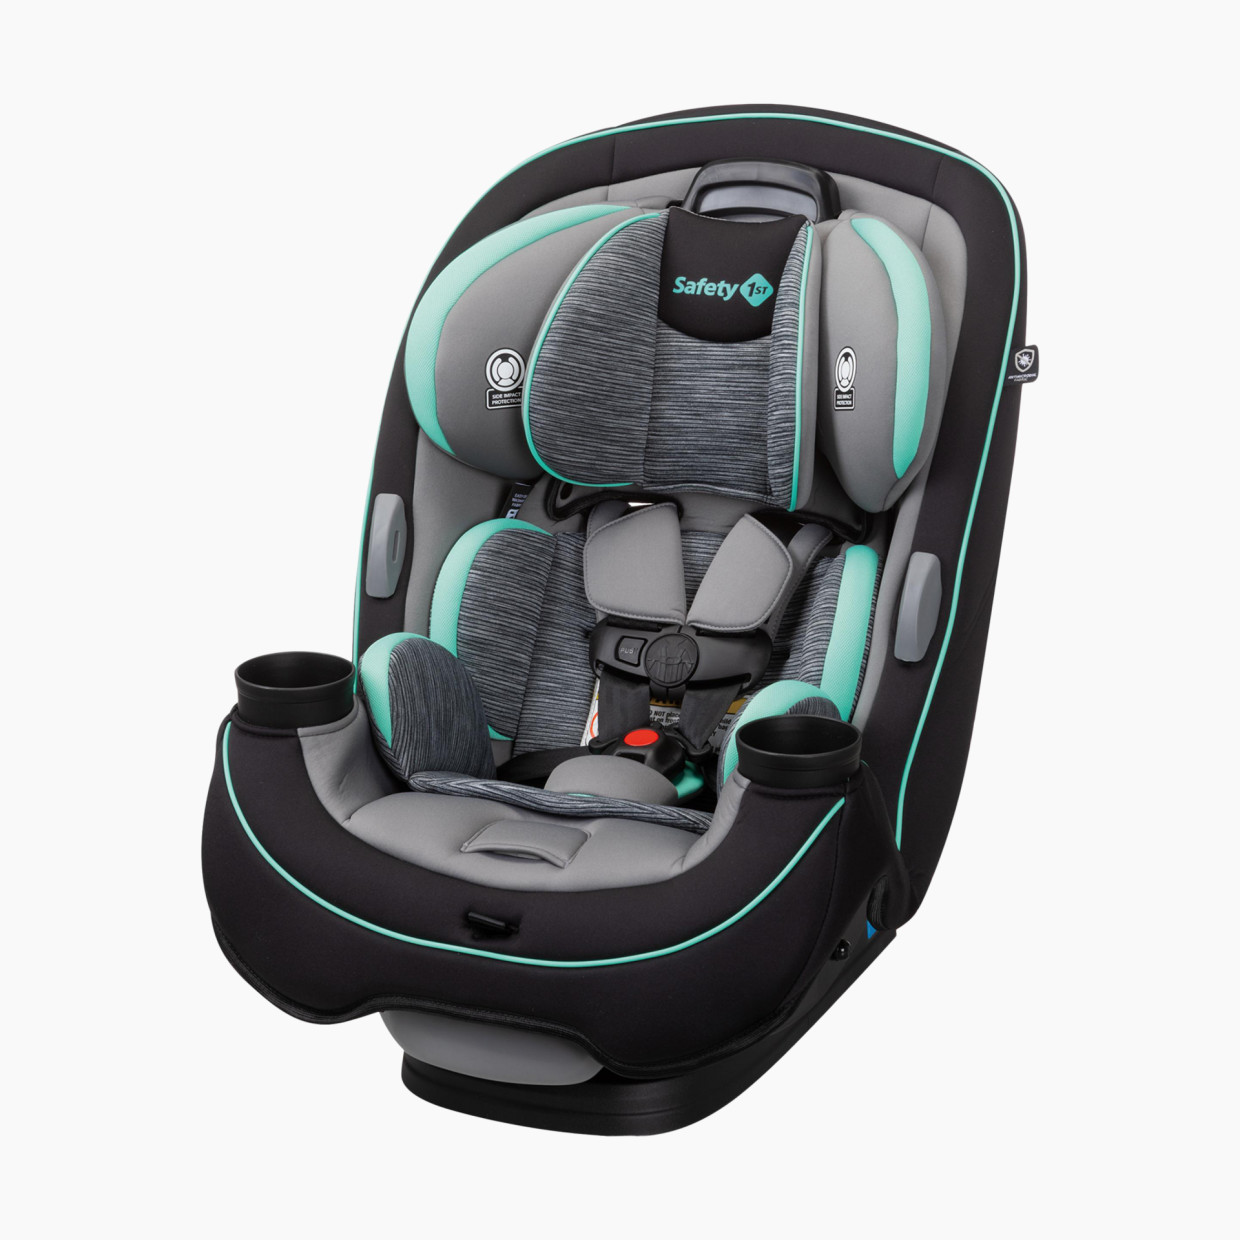 Safety 1st Grow and Go All-in-One Convertible Car Seat - Aqua Pop.